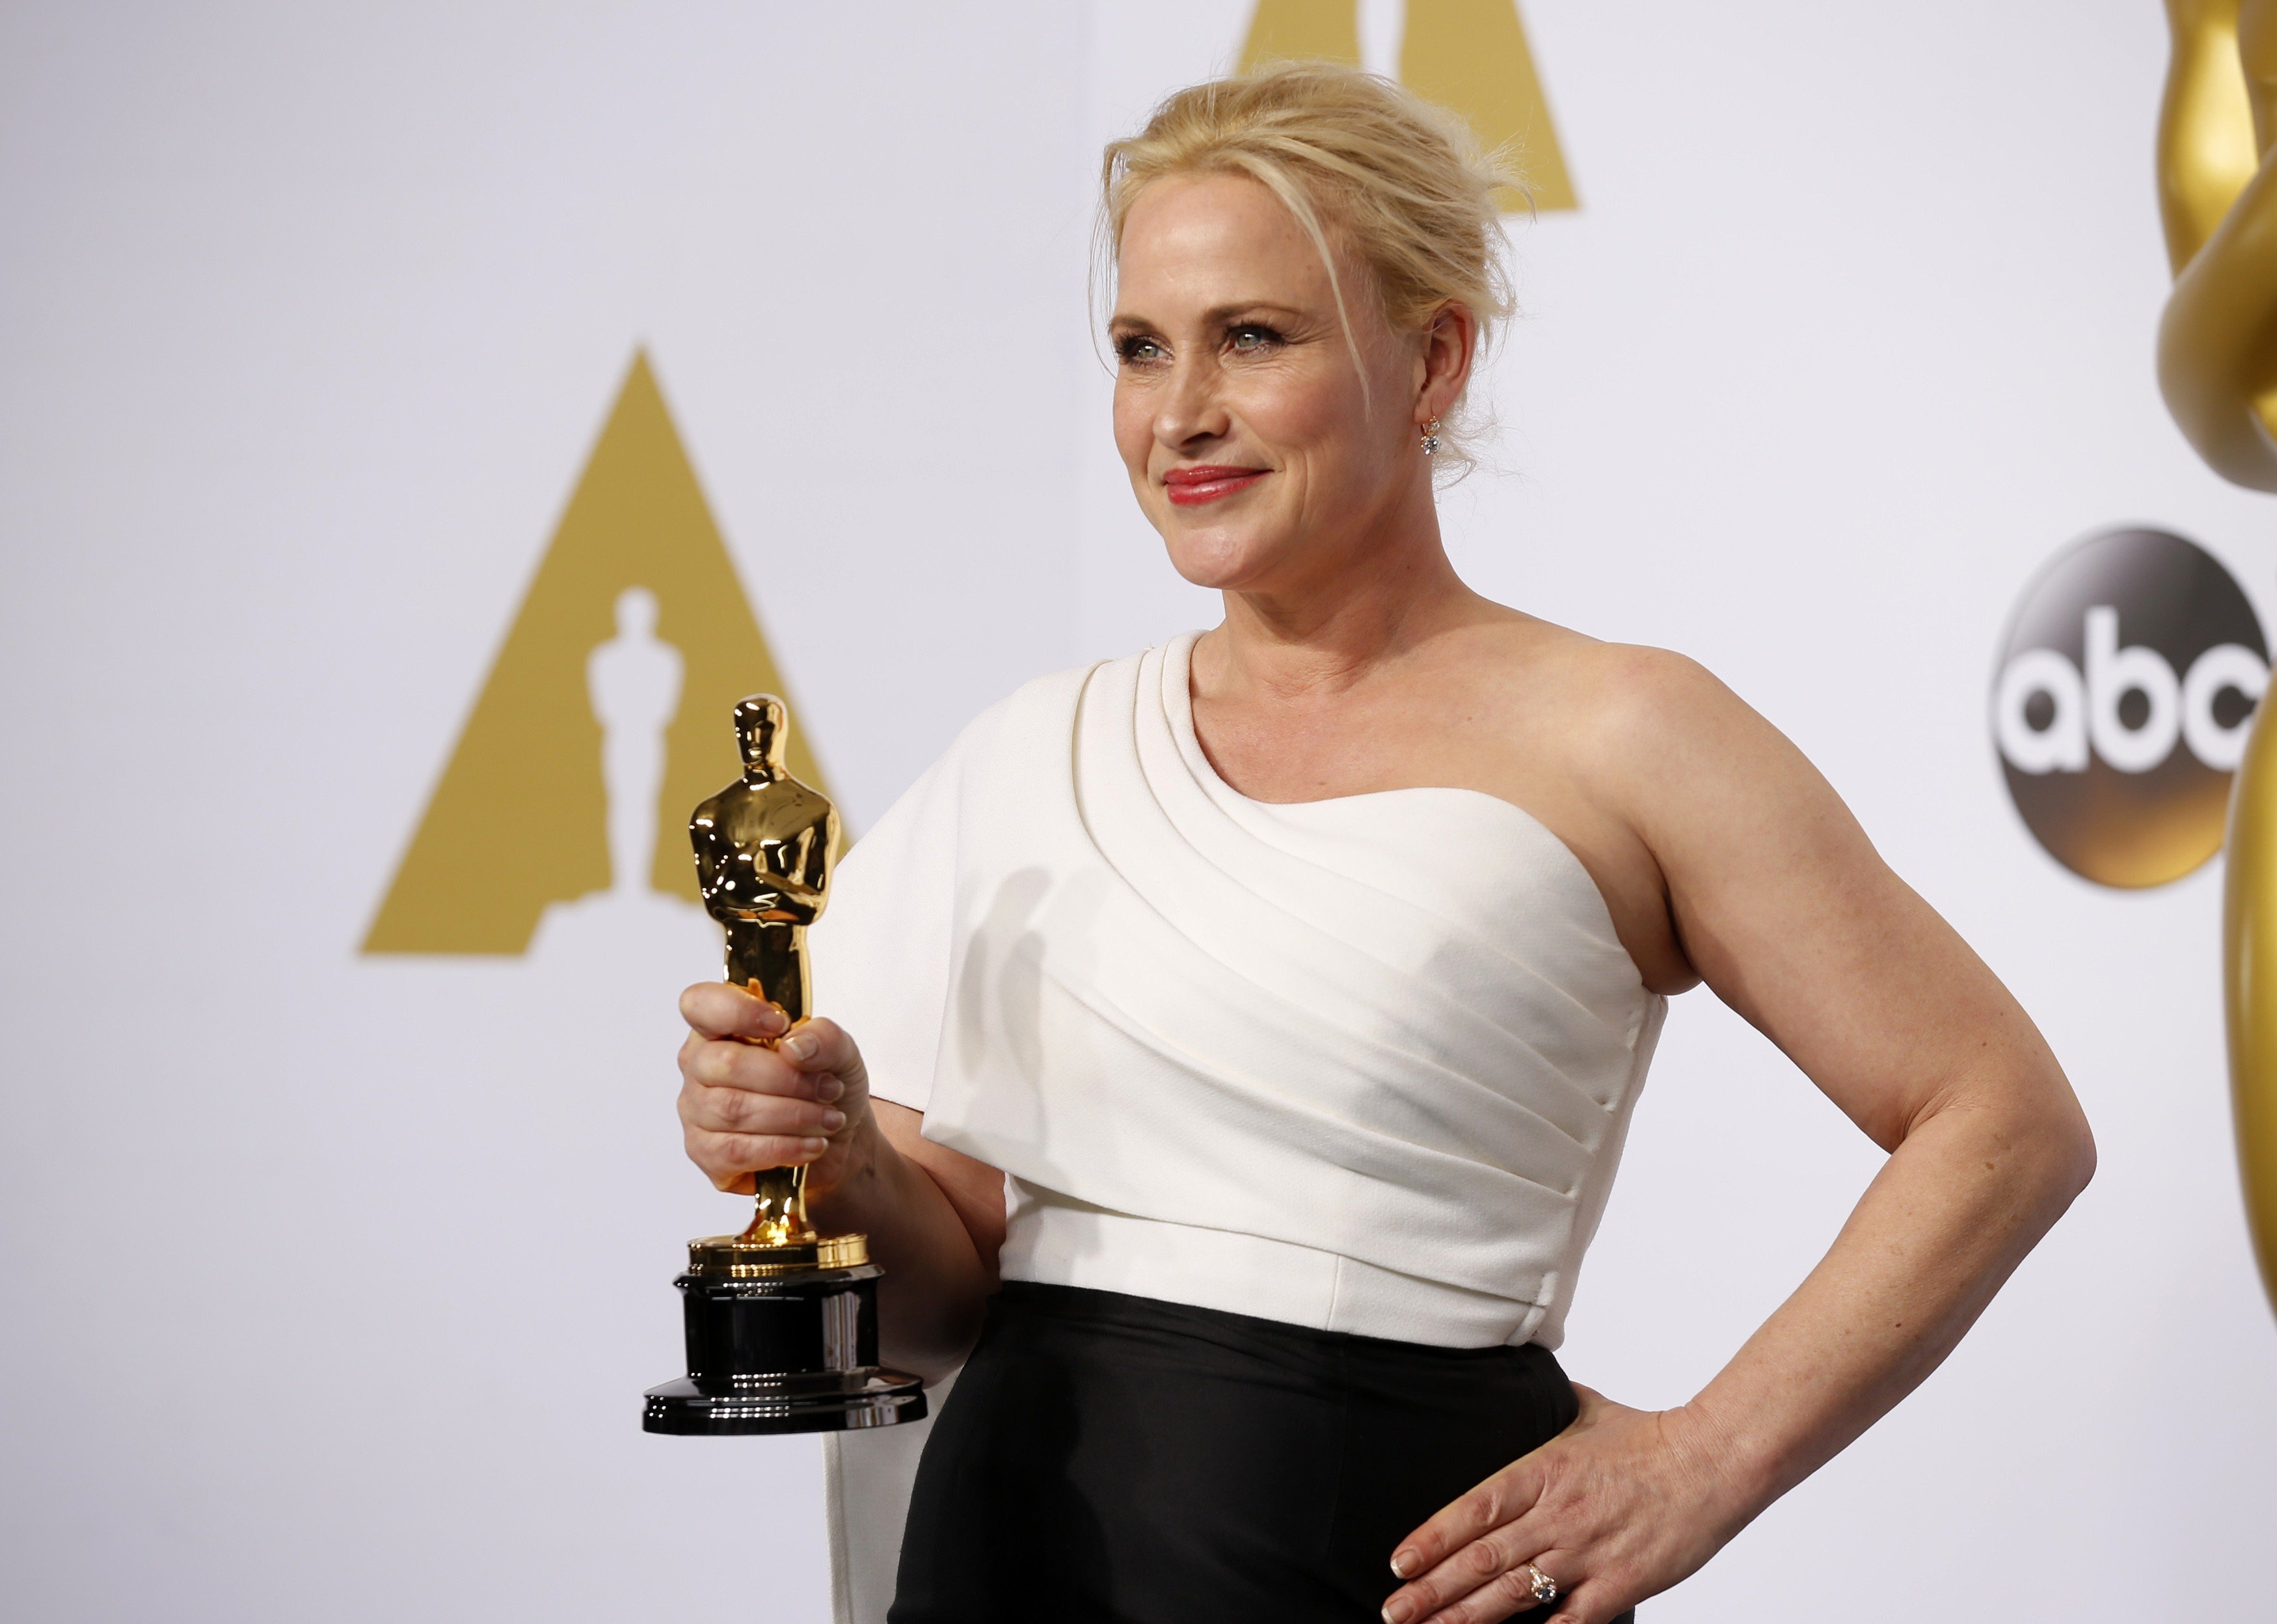 Patricia Arquette, best supporting actress winner for her role in "Boyhood," poses with her award
                       during the 87th Academy Awards in Hollywood on Feb. 22, 2015. (Lucy Nicholson—Reuters)